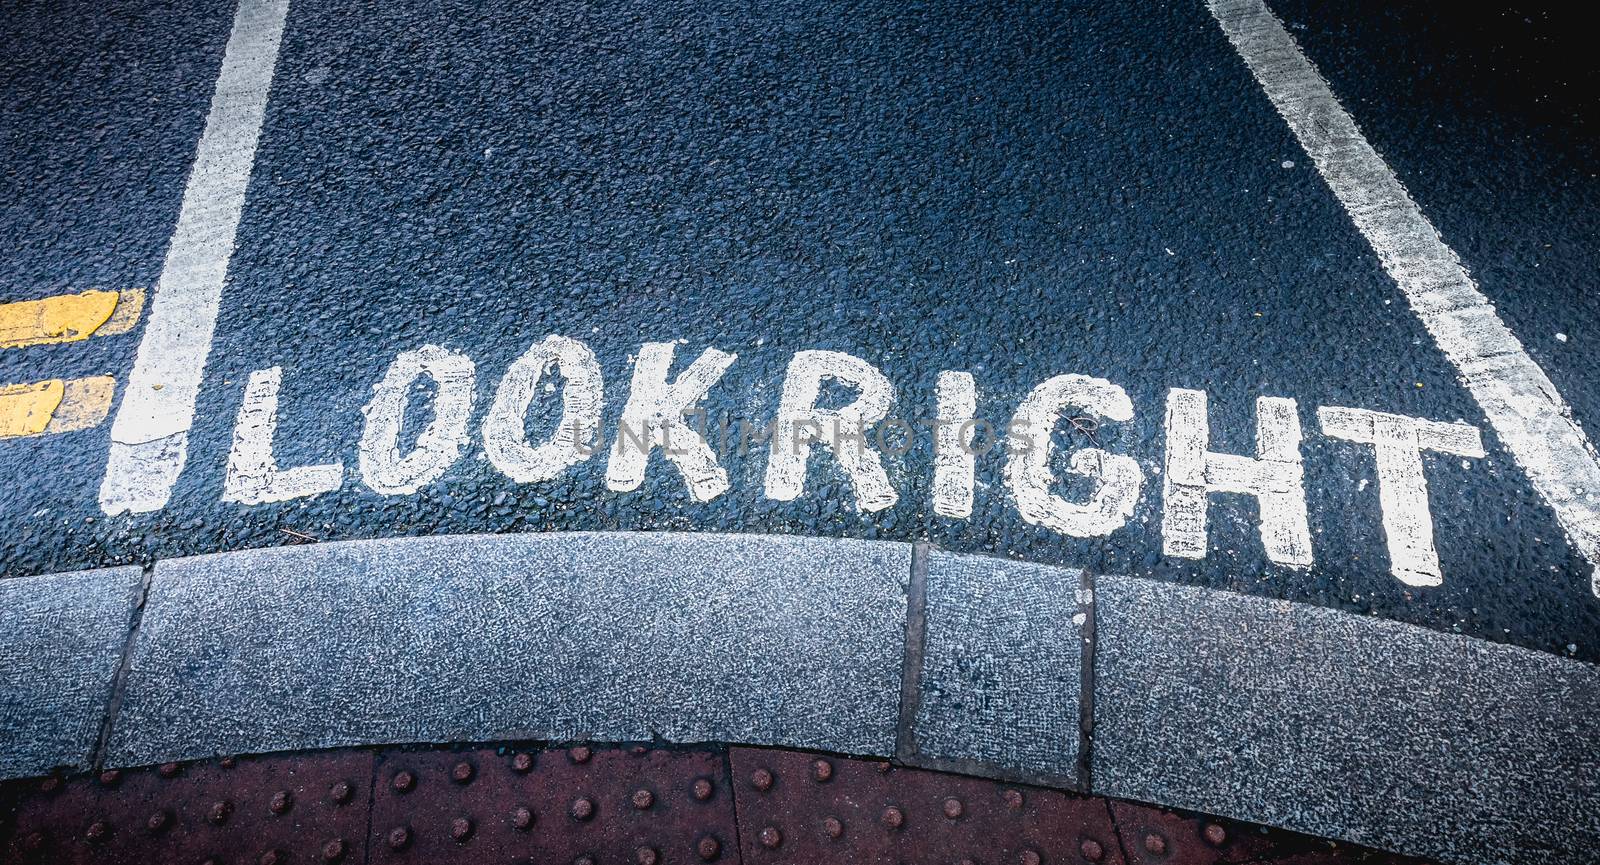 Look Right painted on the road on a pedestrian crossing in Dubli by AtlanticEUROSTOXX